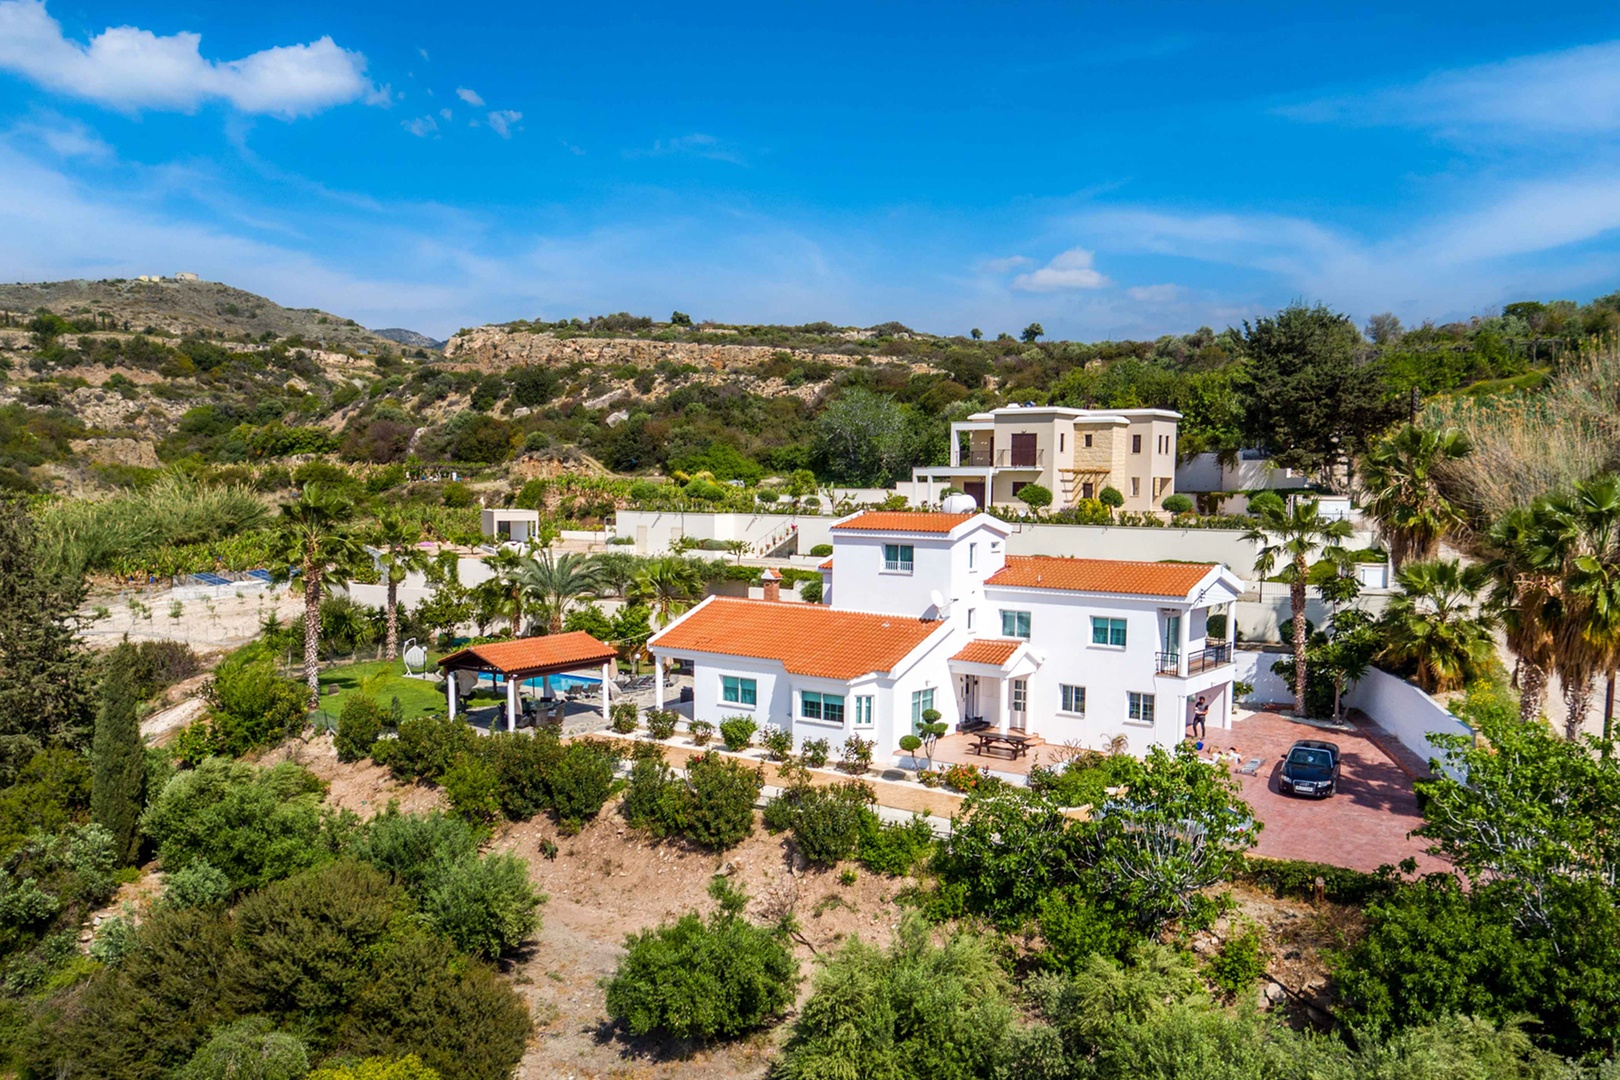 Villa Olivia - Secluded Luxury 5 Bed Villa Overlooking Coral Bay, Cyprus